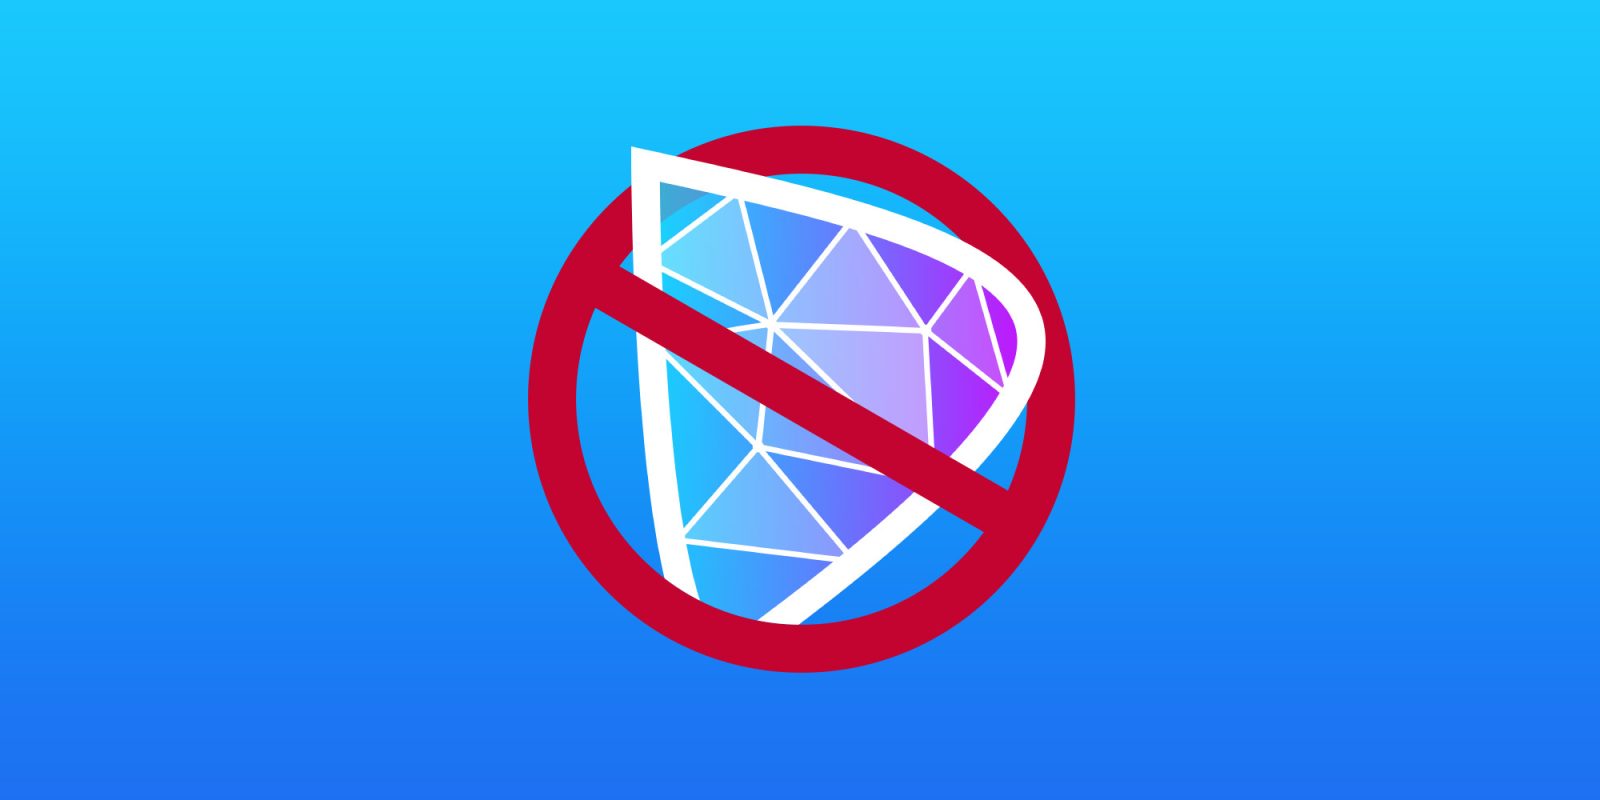 Apple threatened to remove Damus from App Store for letting users tip each other with bitcoin